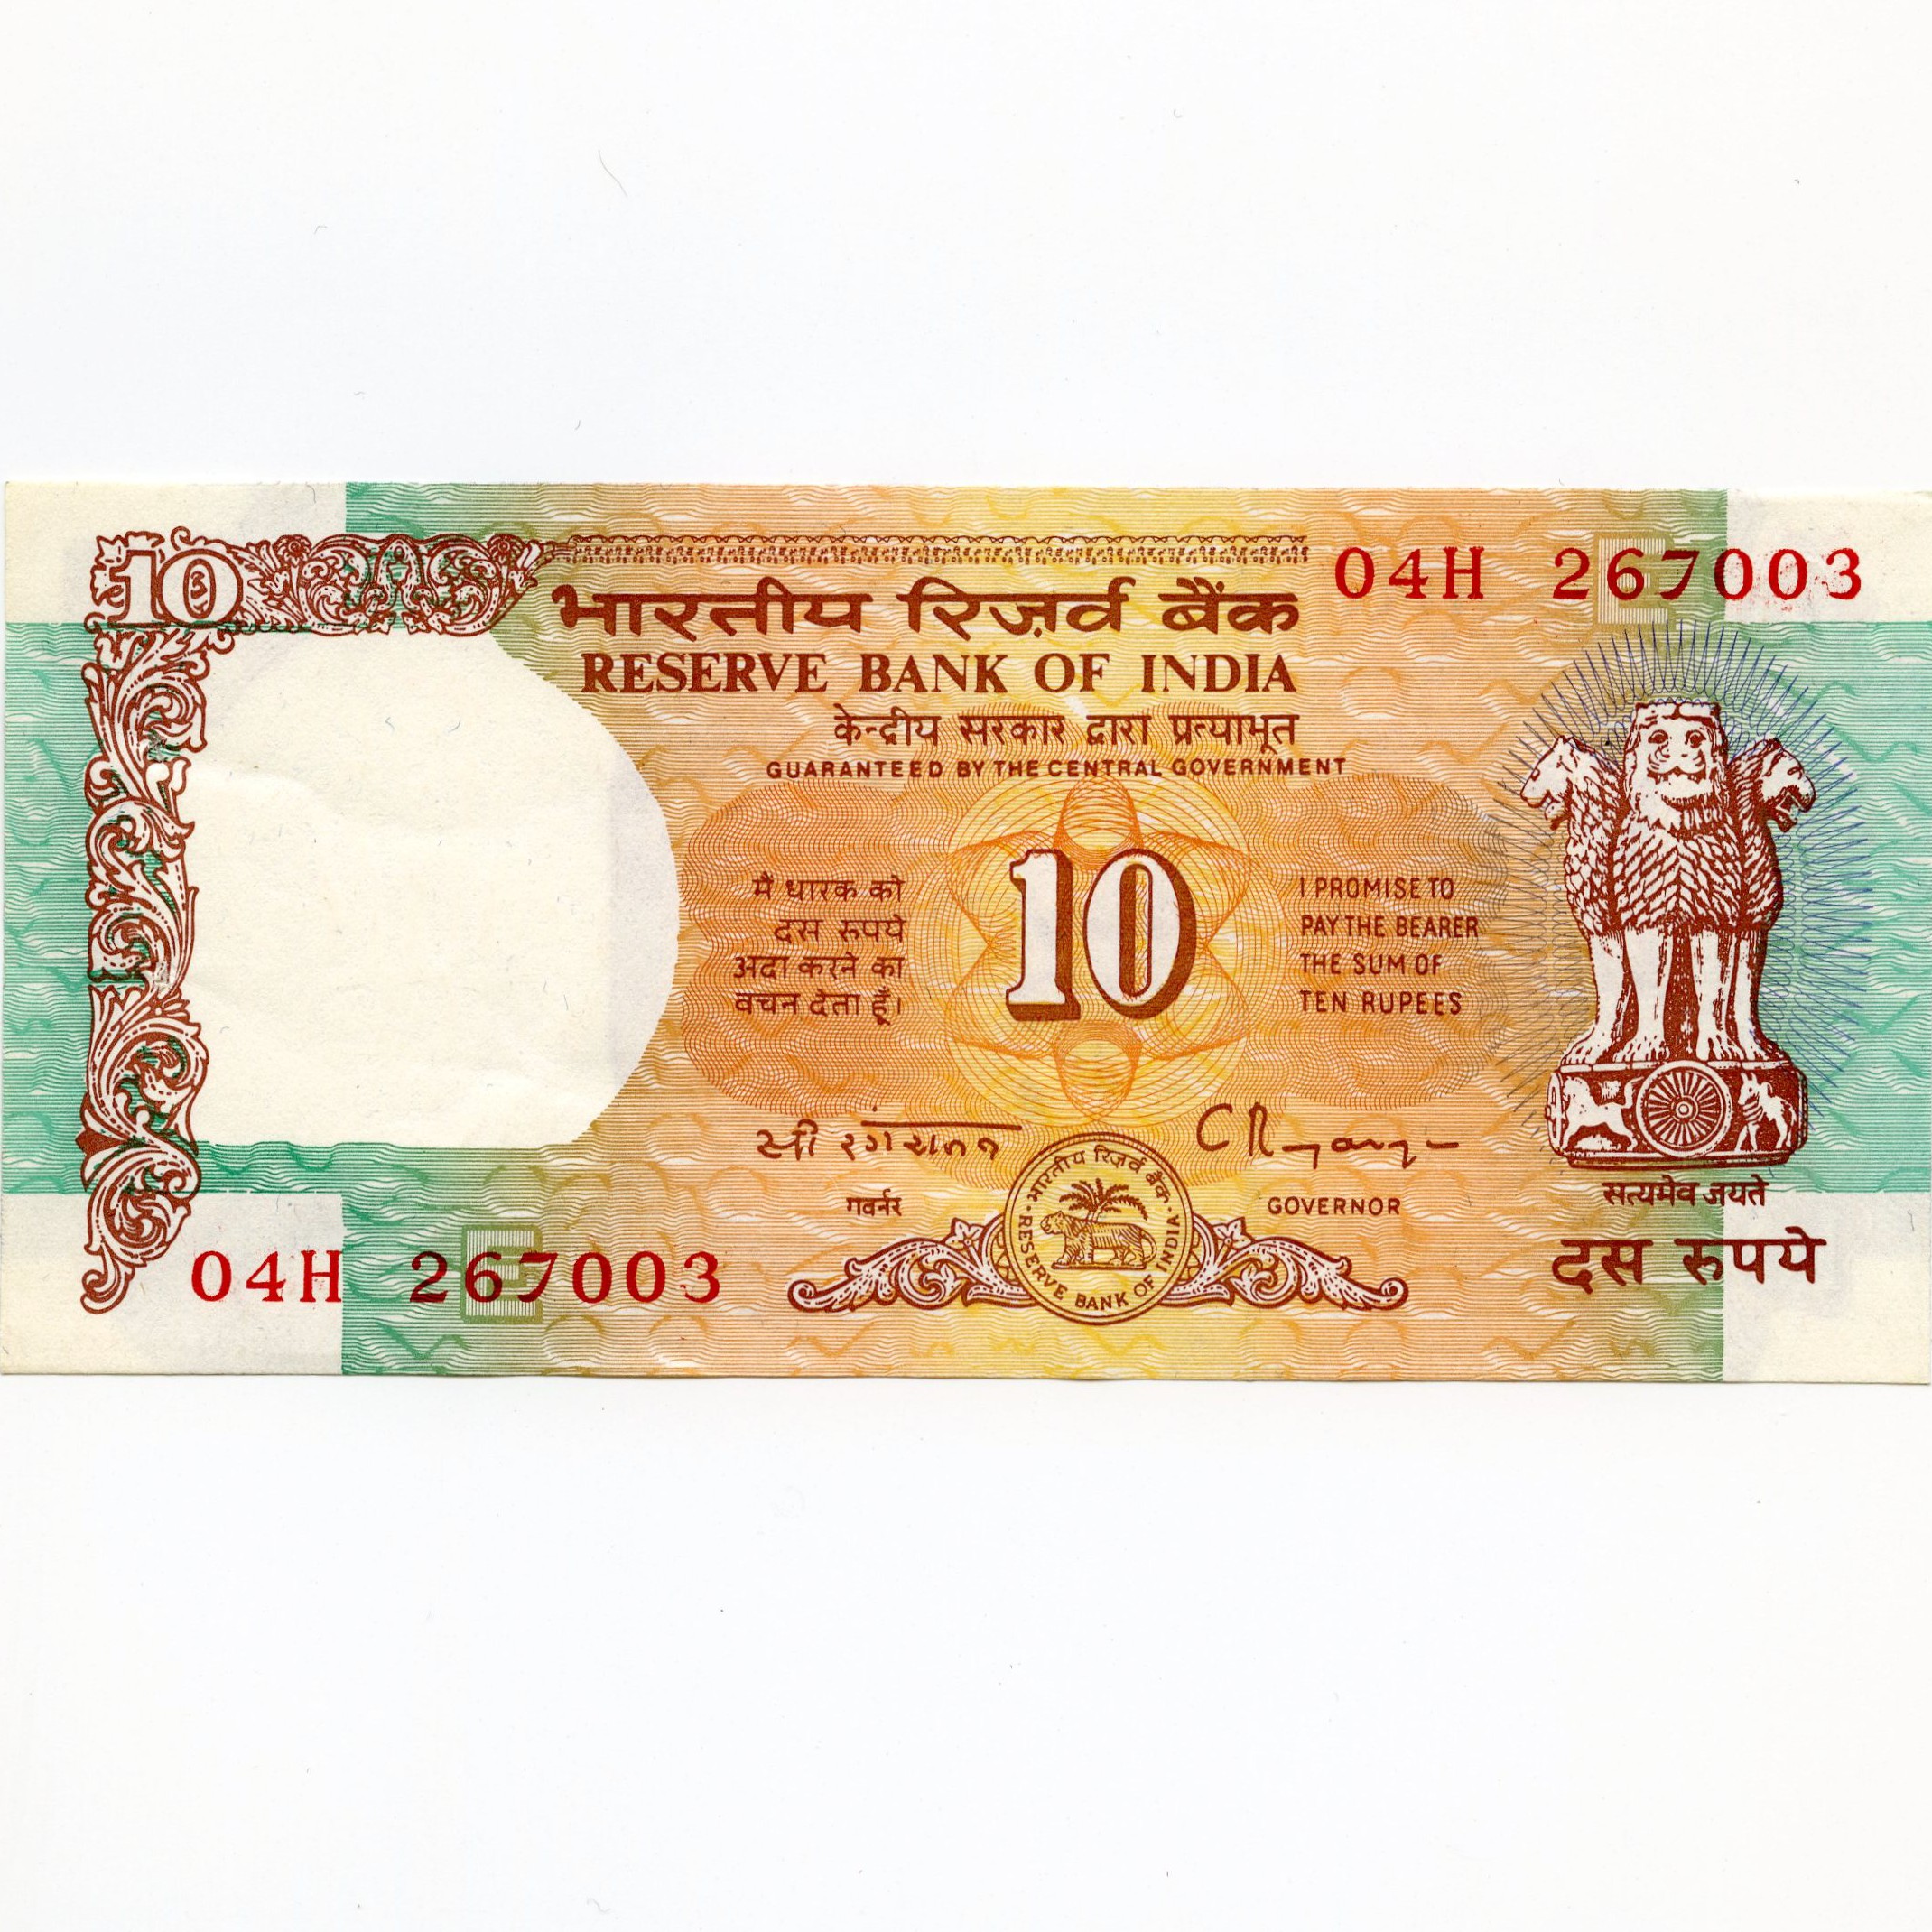 Inde - 10 Rupees - 04H 267003 avers